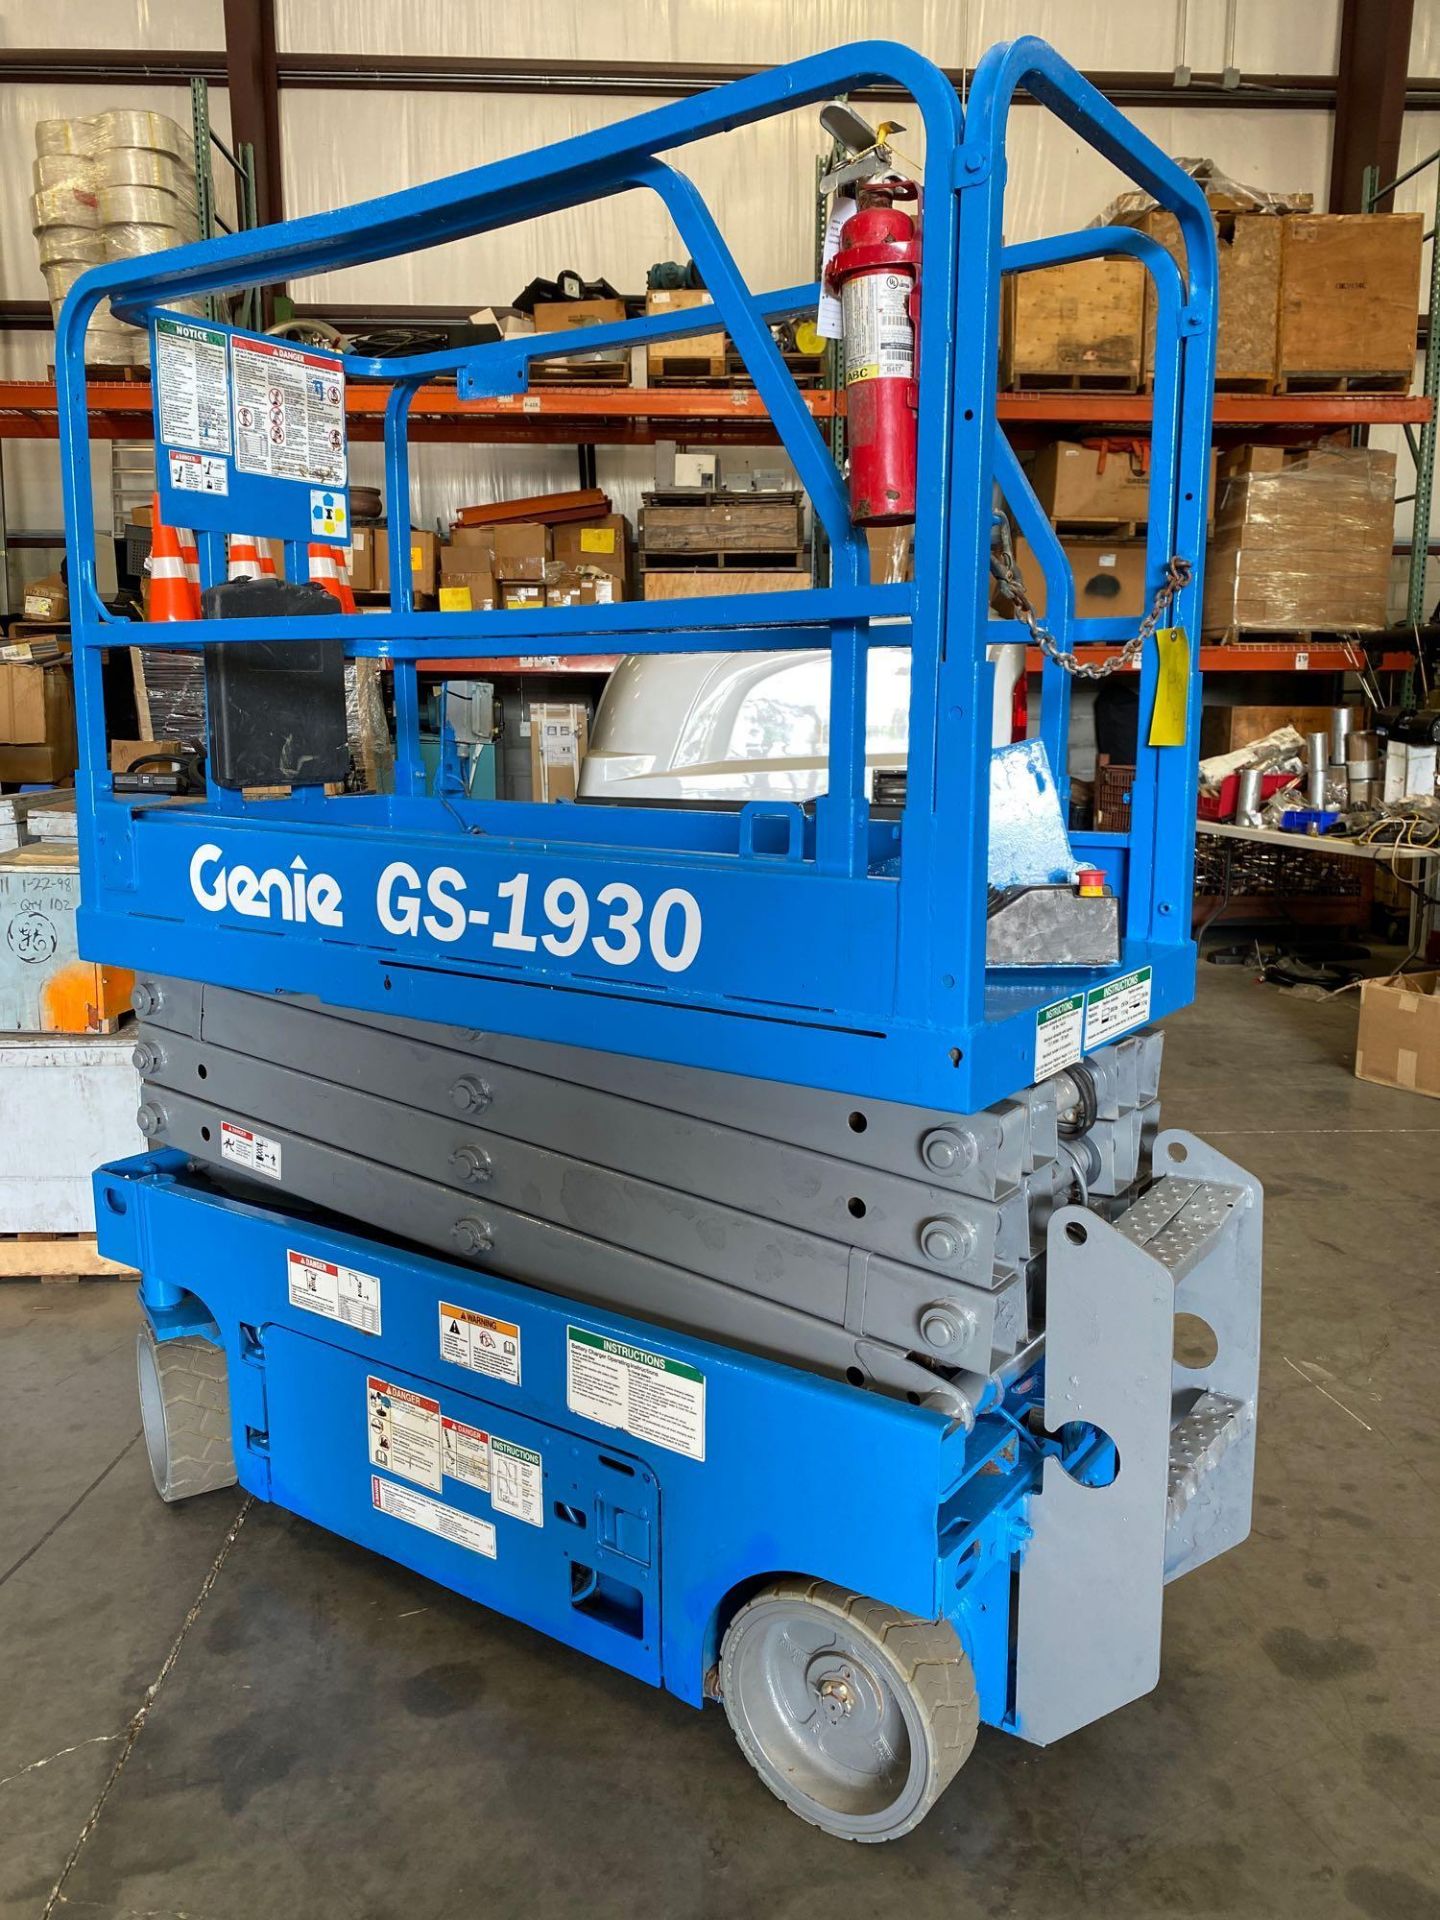 2013 GENIE GS-1930 ELECTRIC SCISSOR LIFT, 110 HOURS SHOWING, BUILT IN BATTERY CHARGER